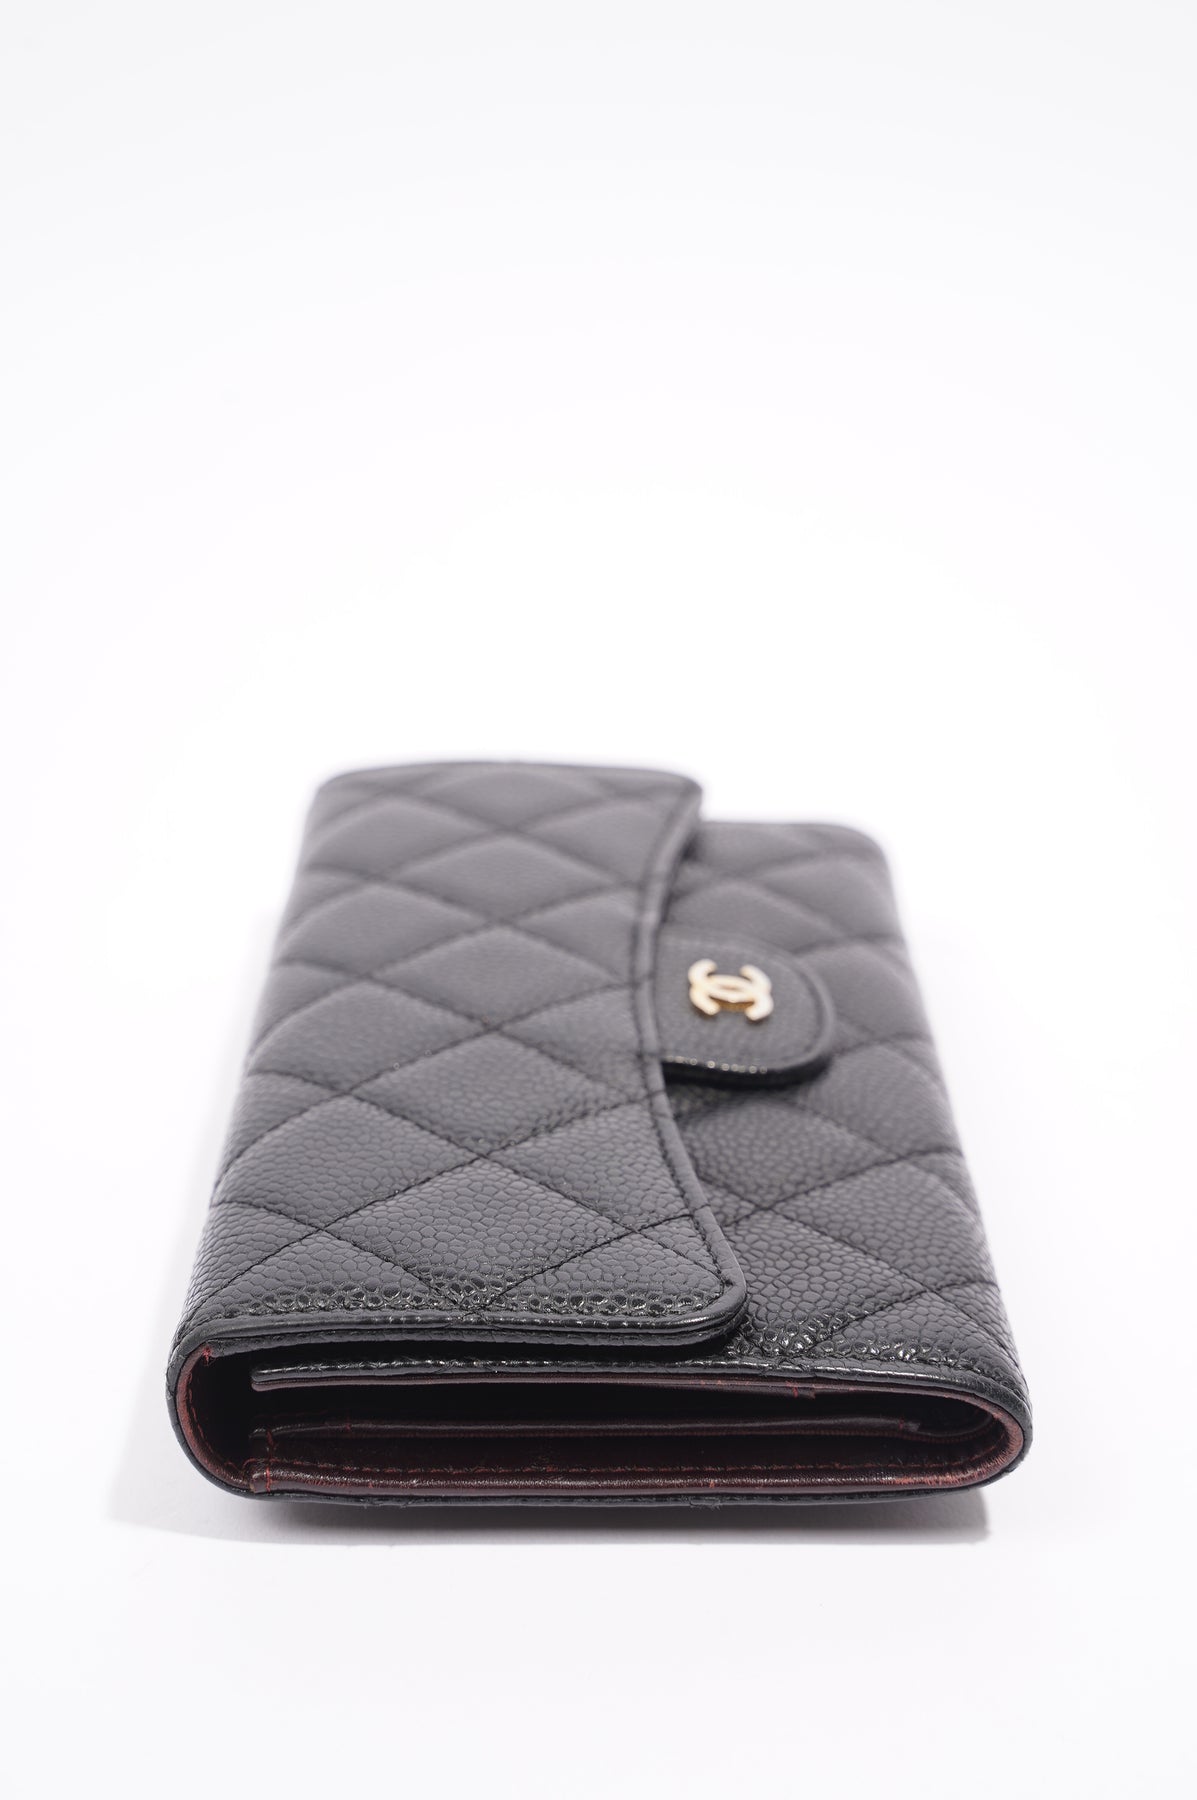 black leather chanel wallet